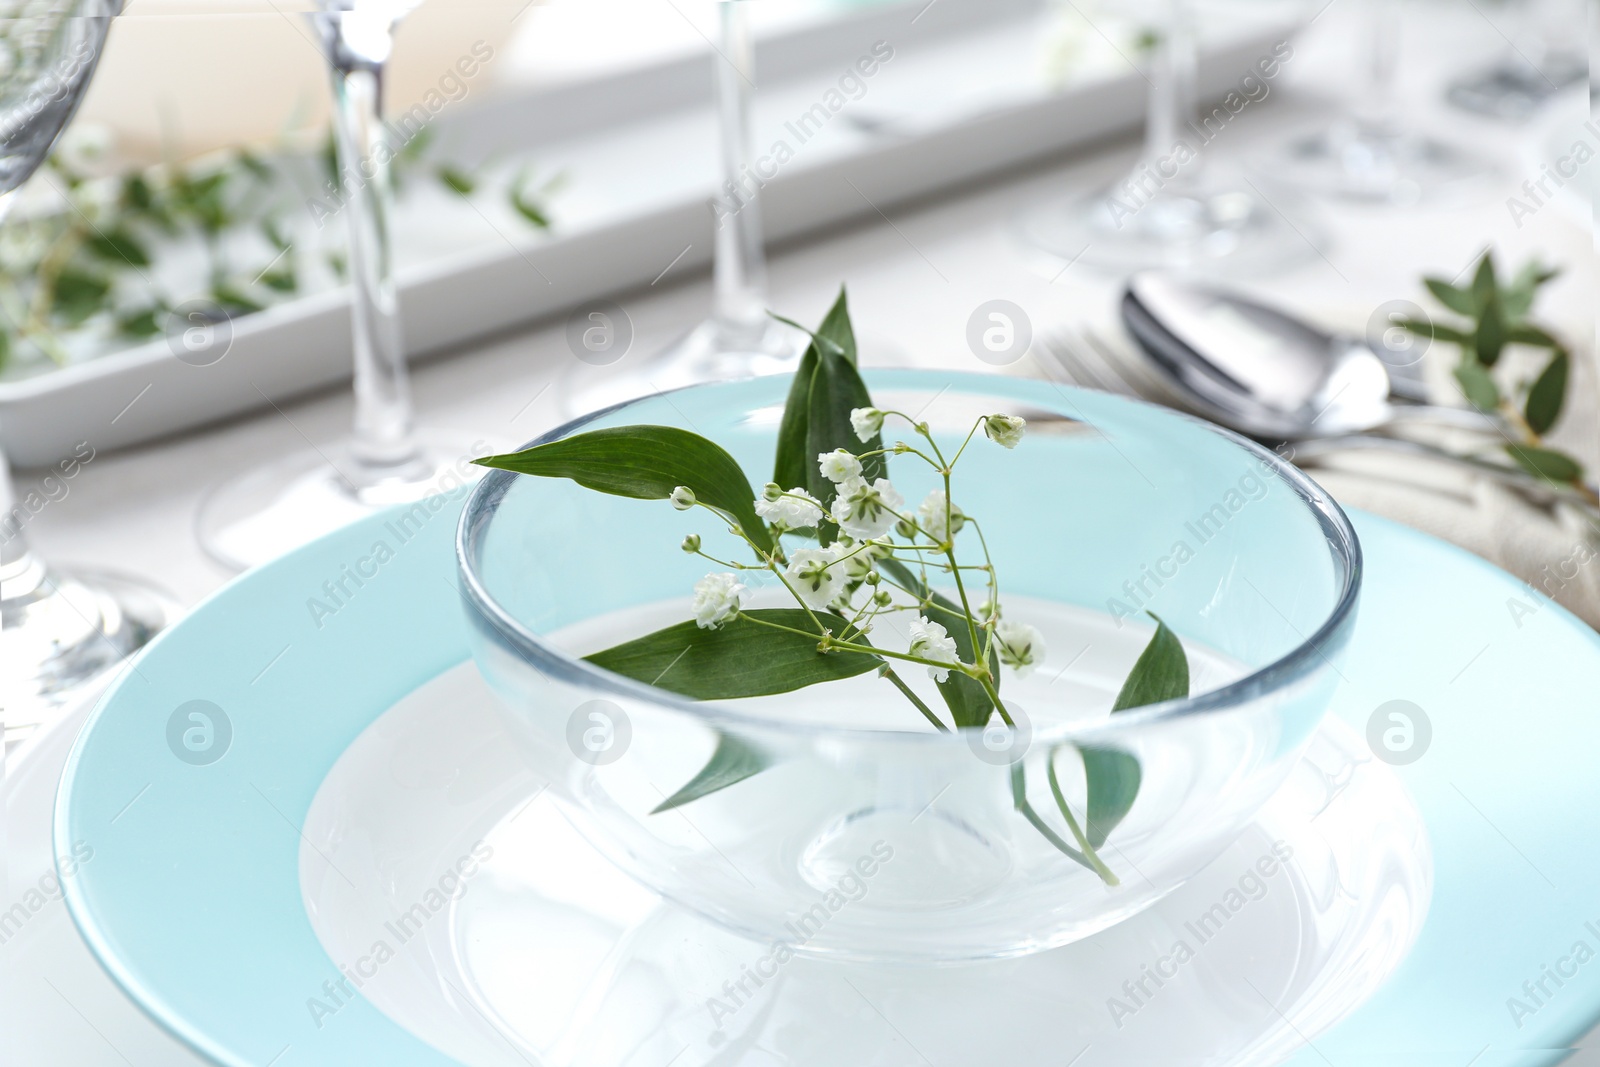 Photo of Stylish tableware with leaves and flowers on table, closeup. Festive setting